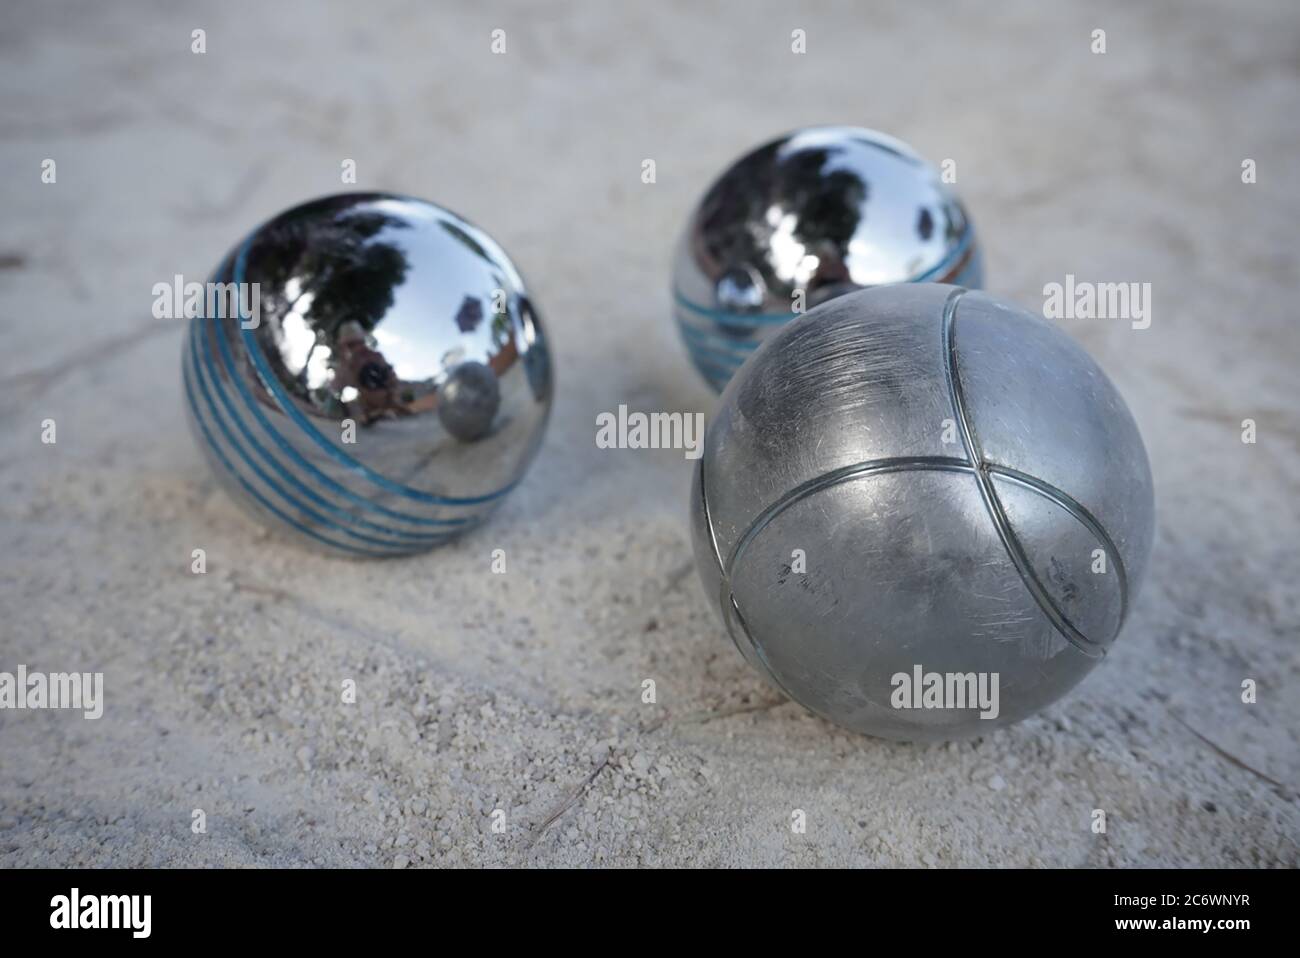 Petanque ball boules bowls on a dust floor, photo in impact. Game